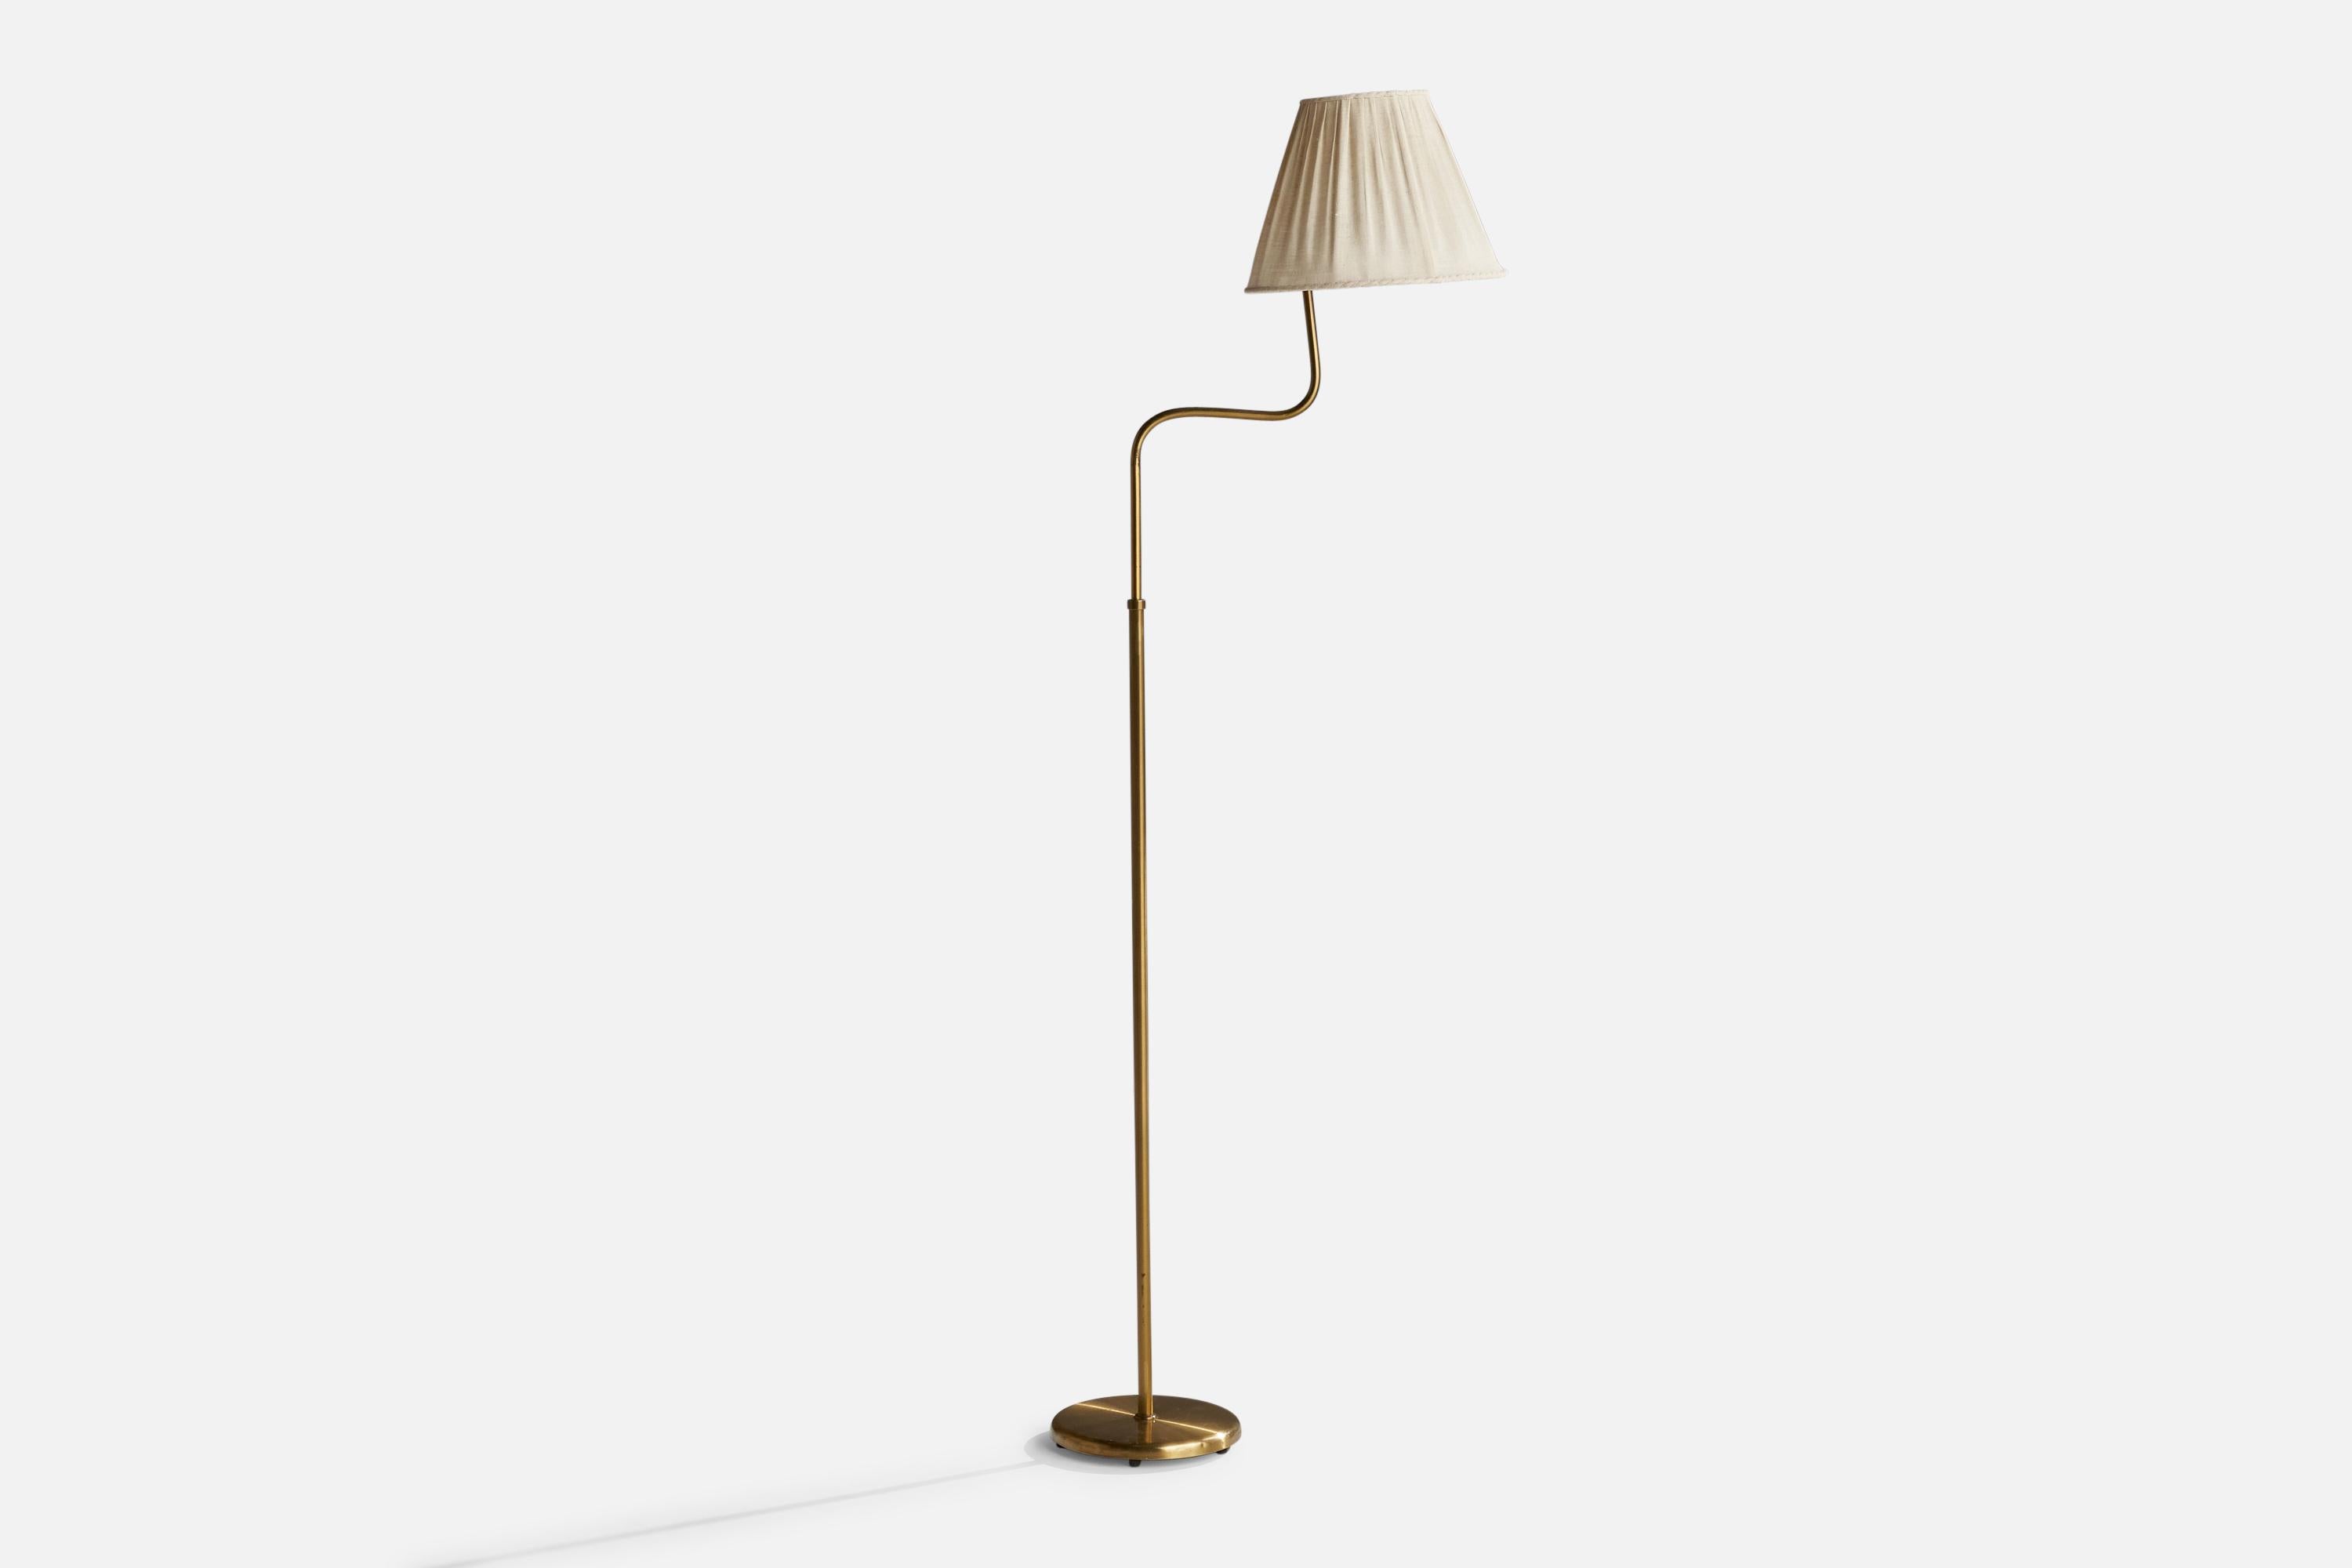 A brass and off-white fabric floor lamp designed and produced in Sweden, 1940s.

Overall Dimensions (inches): 60” H x 12.5” W x 24” D
Stated dimensions include shade.
Bulb Specifications: E-26 Bulb
Number of Sockets: 1
All lighting will be converted